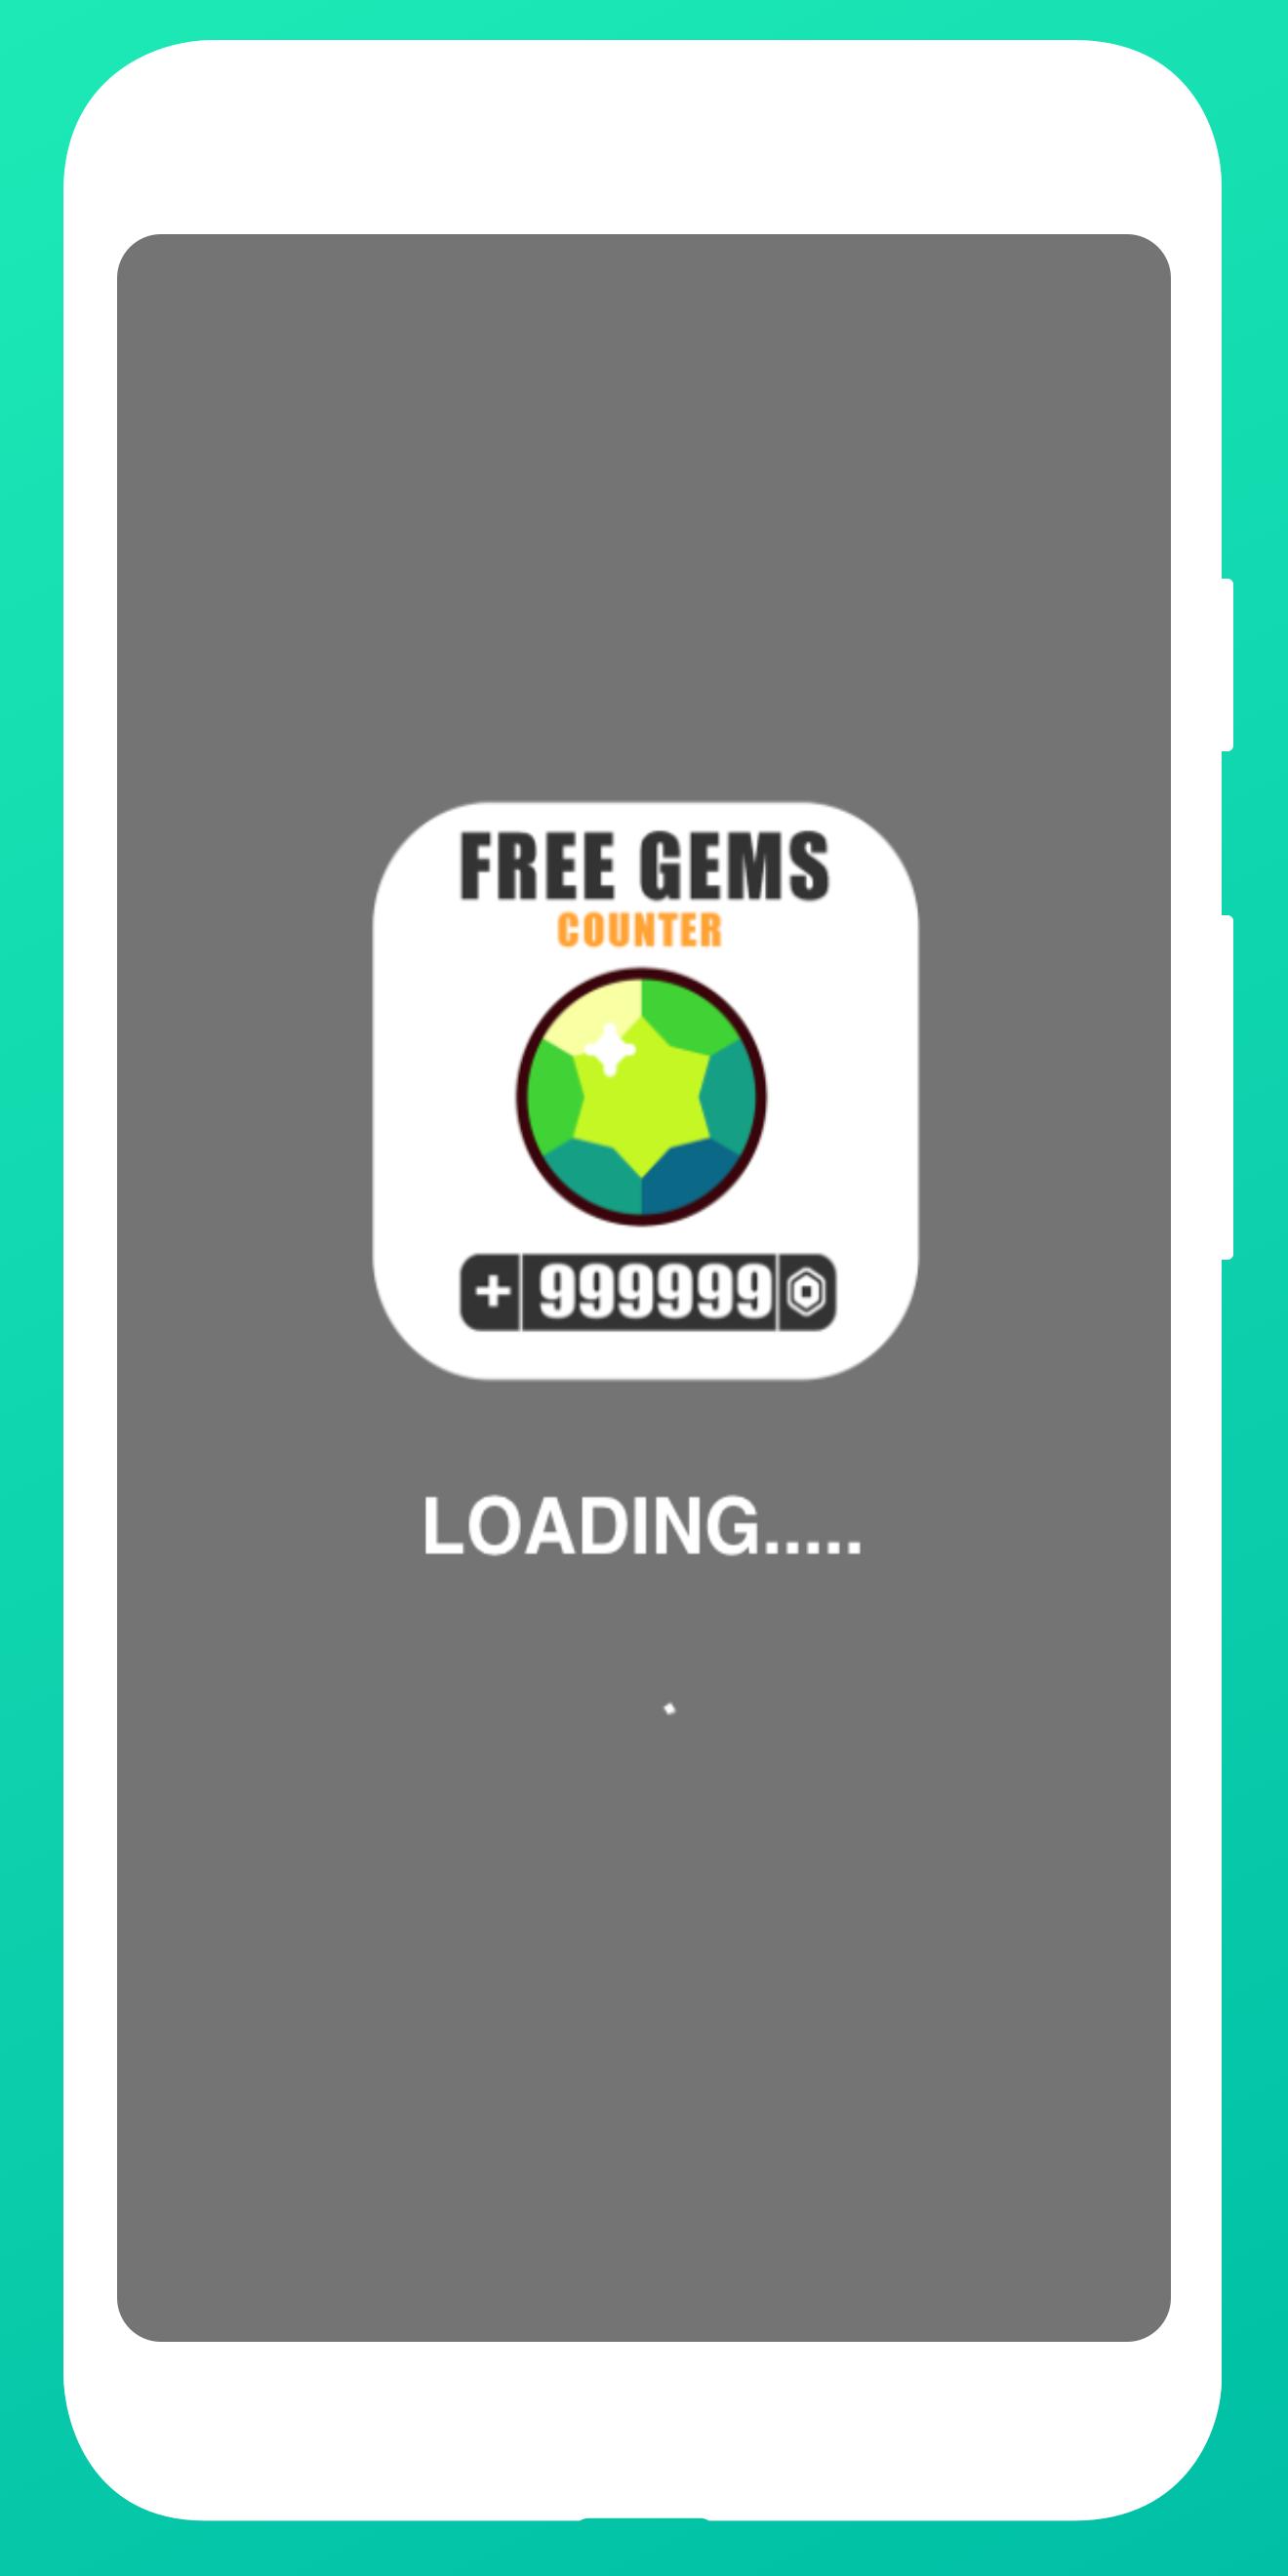 How To Get Free Gems For Brawl Stars Gems Counter For Android Apk Download - brawl stars counters